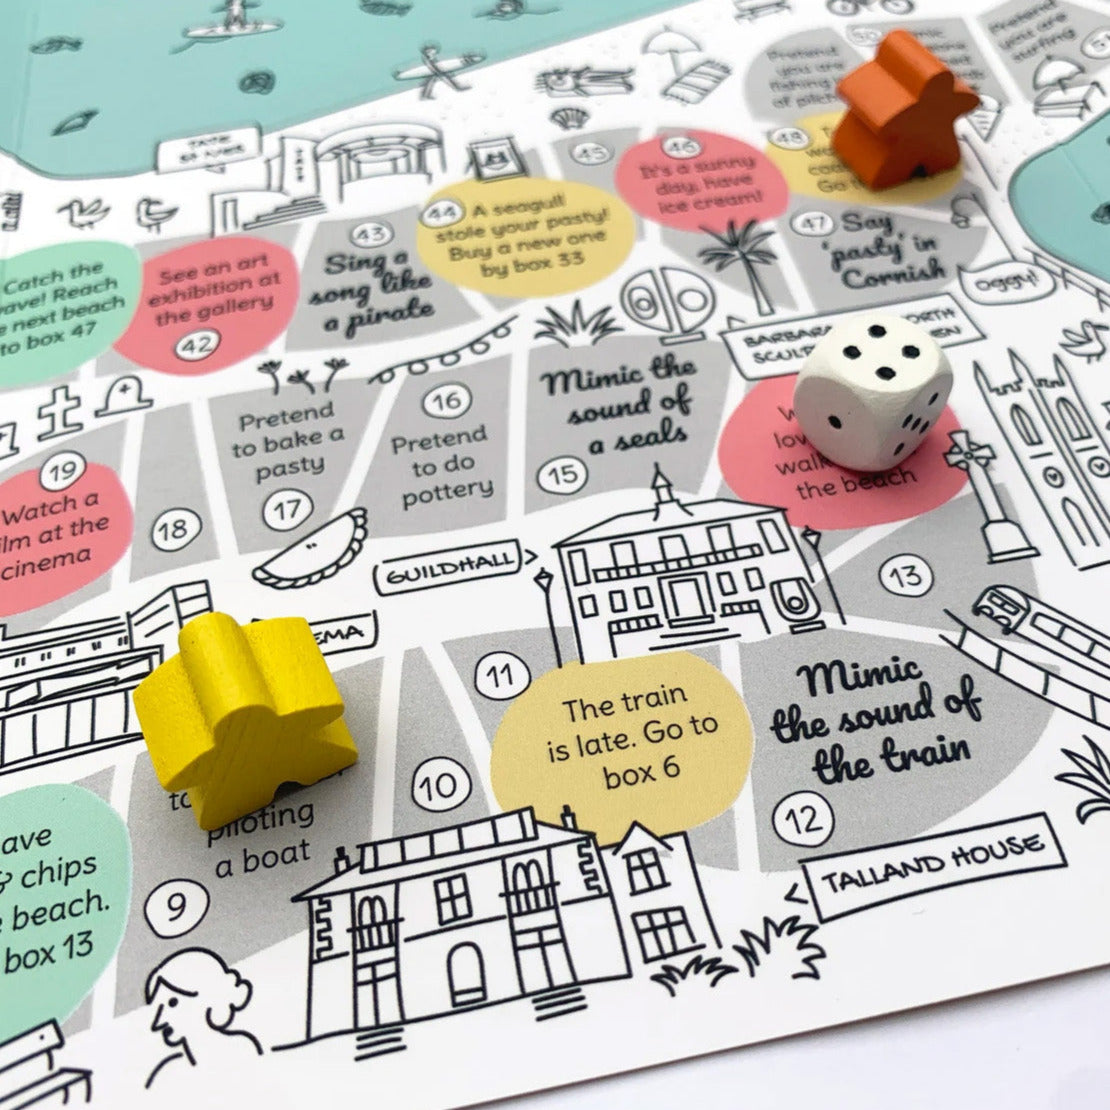 St Ives board game with wooden dice and markers.